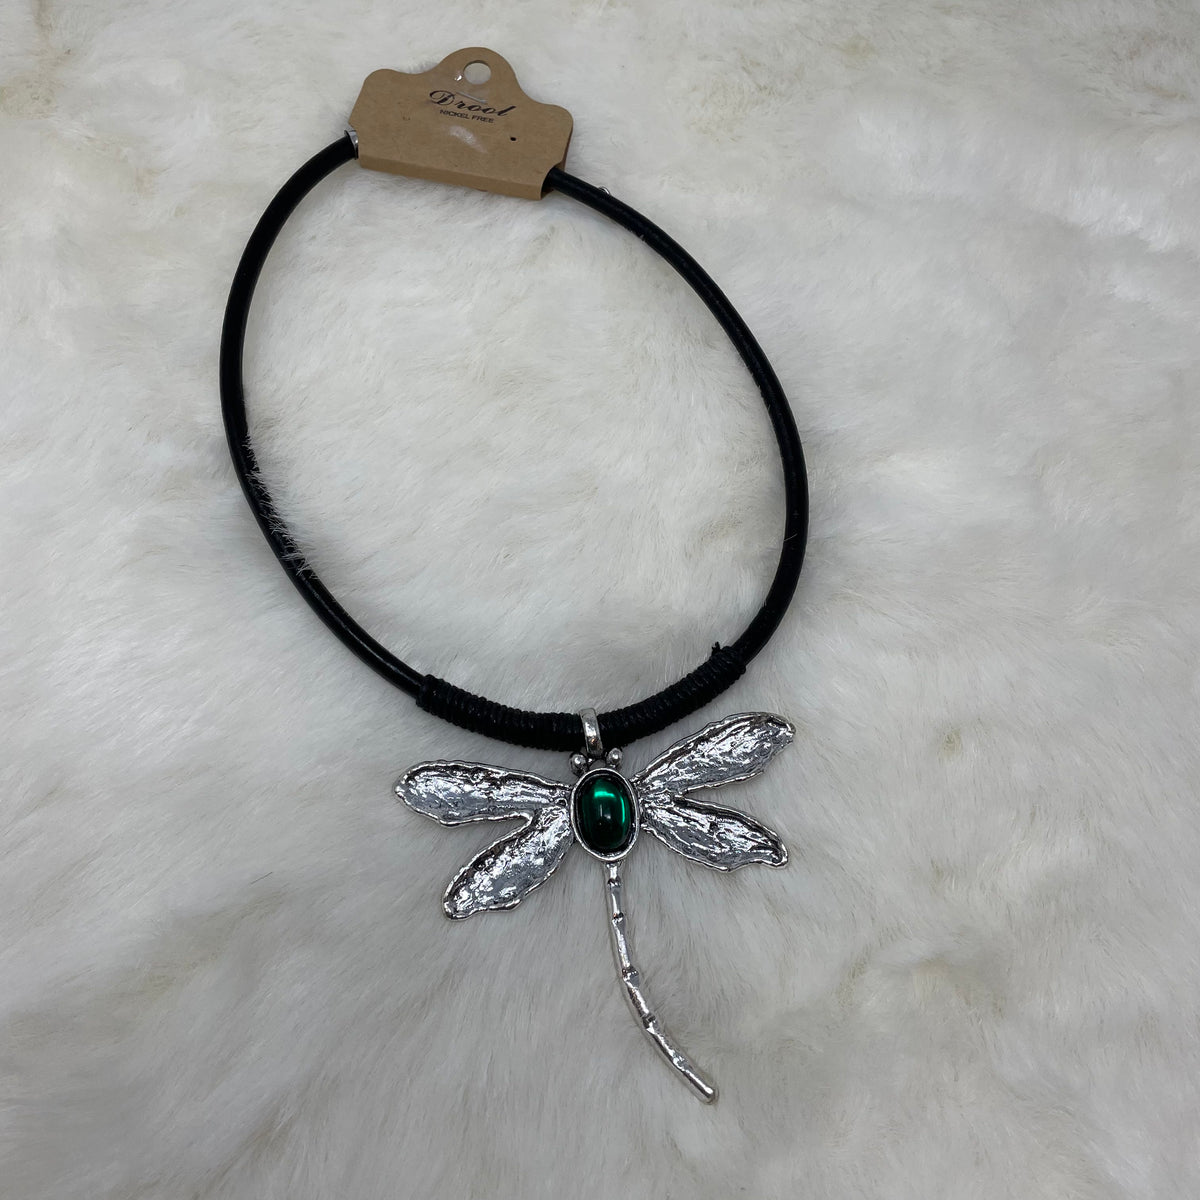 Dragonfly on Thick Cord Necklace